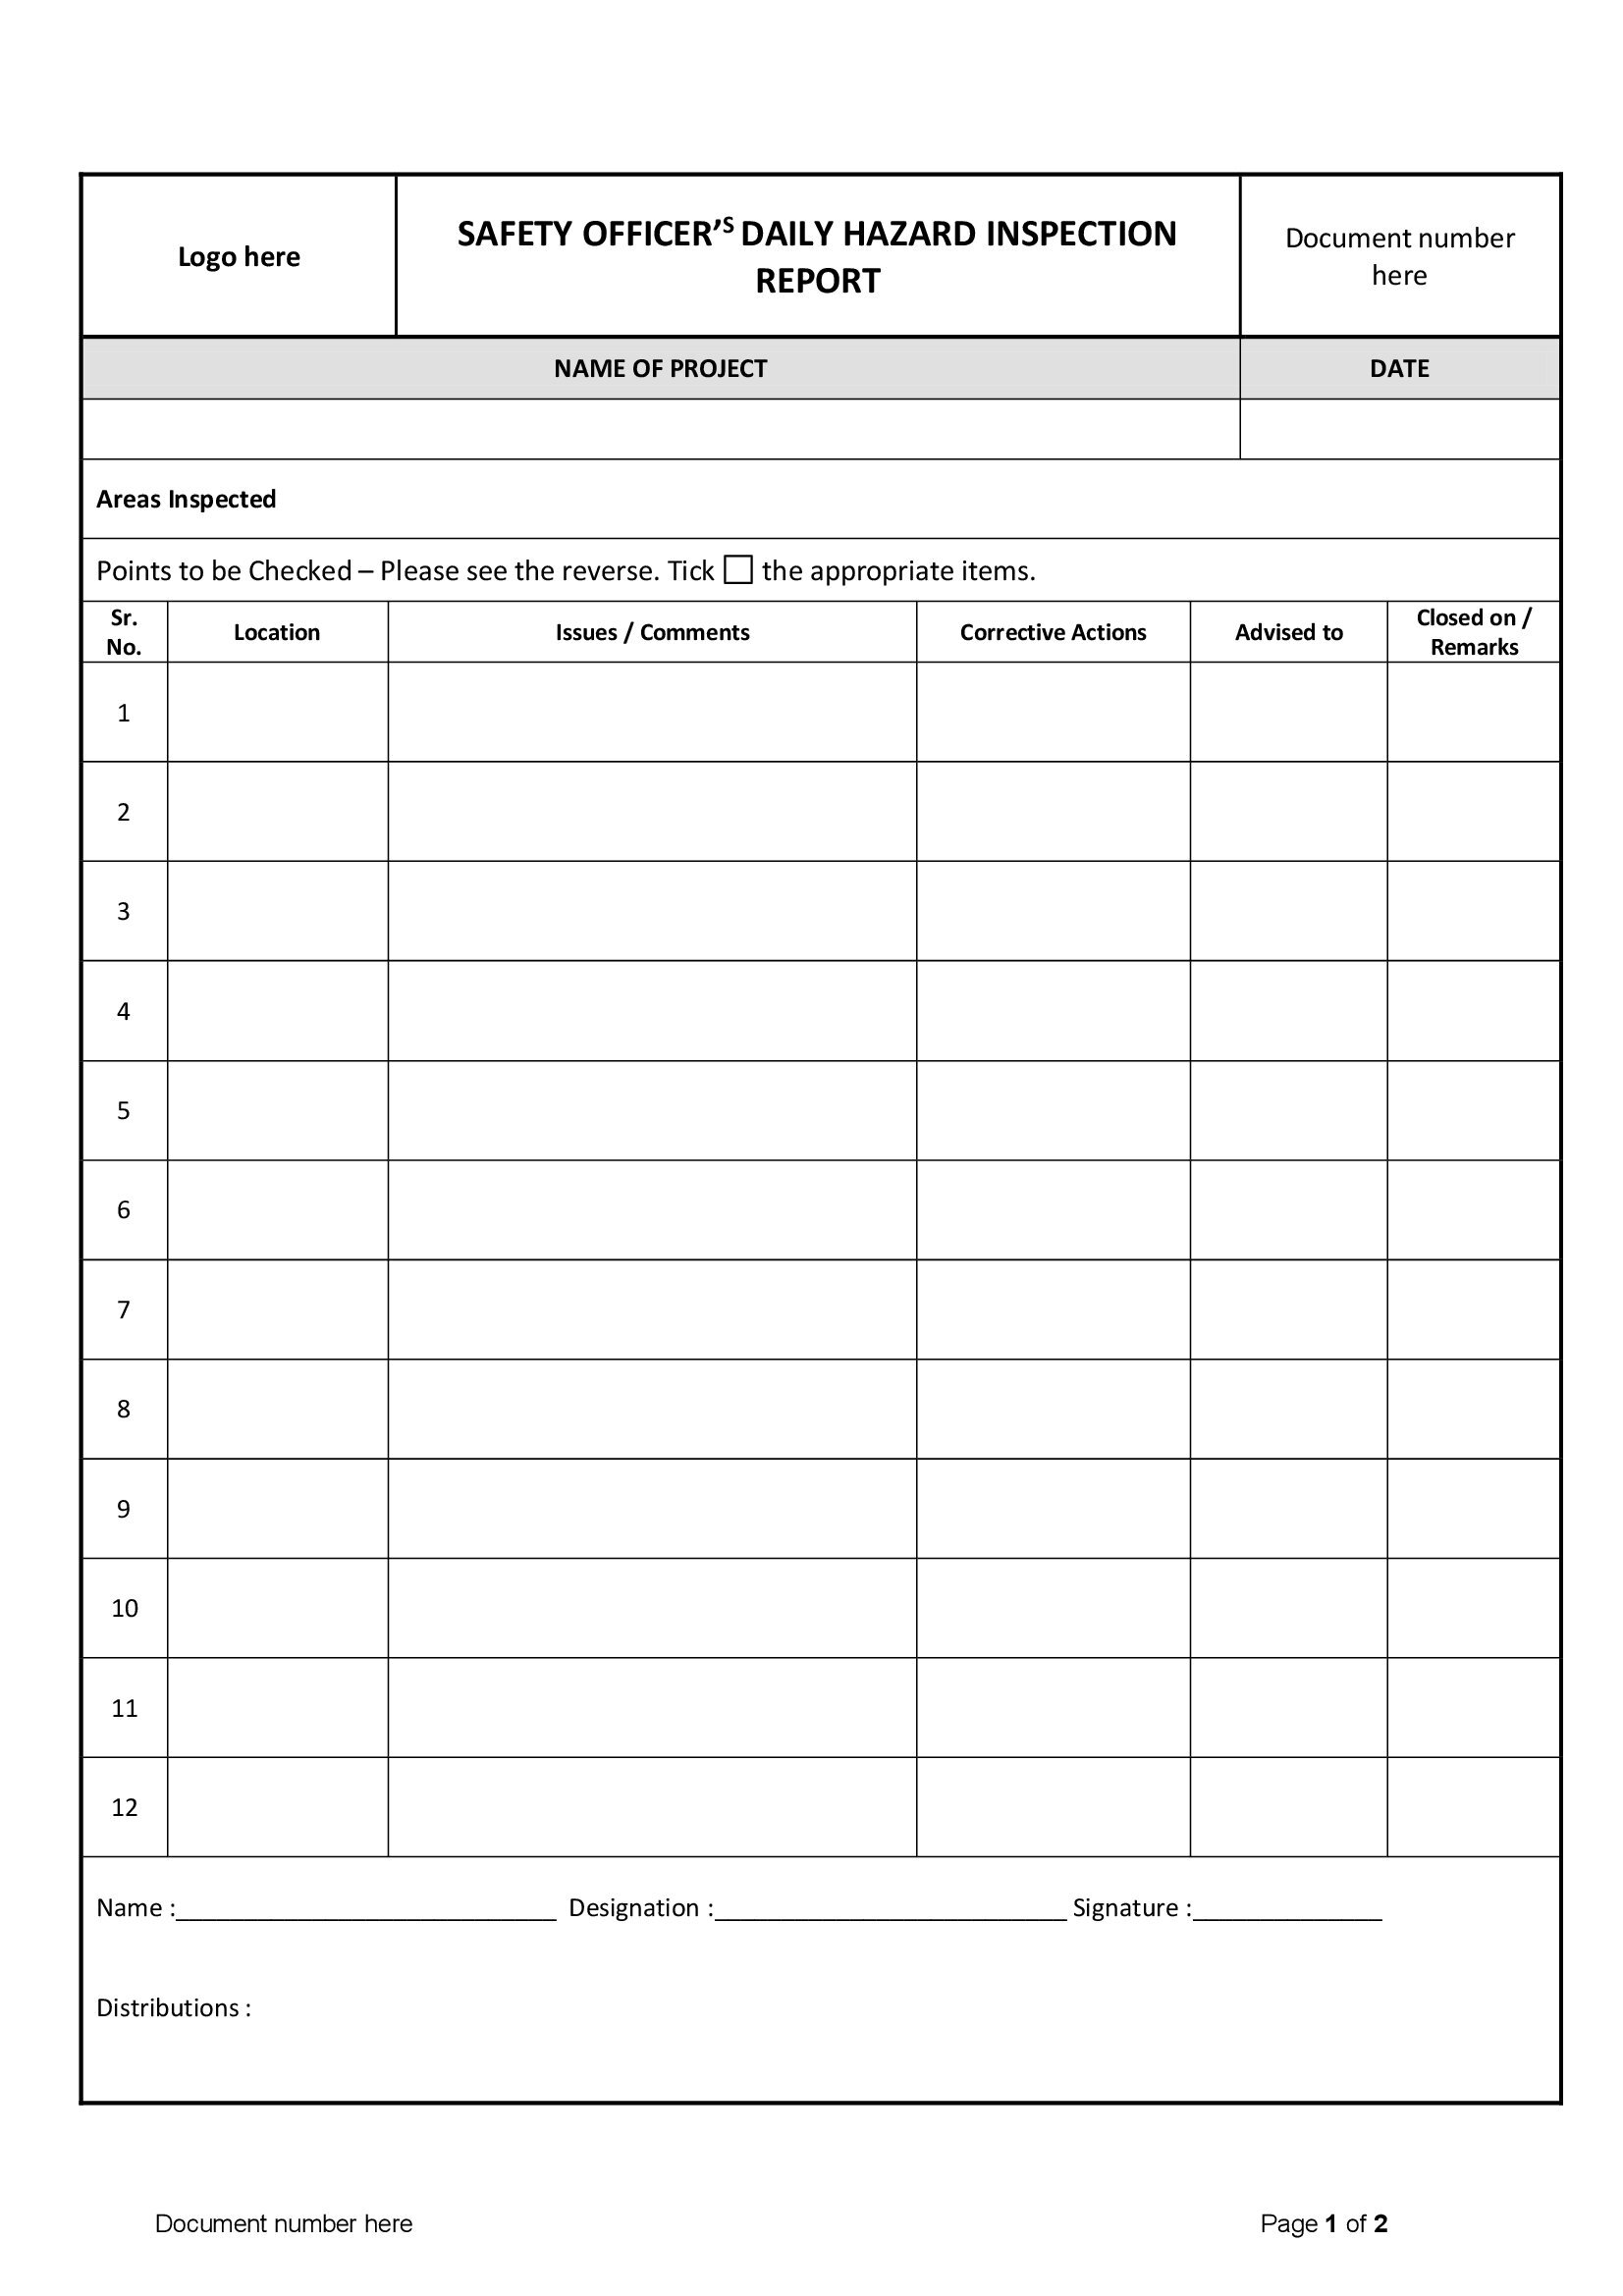 Safety Officer Daily Hazard Inspection Report Hsefiles Com